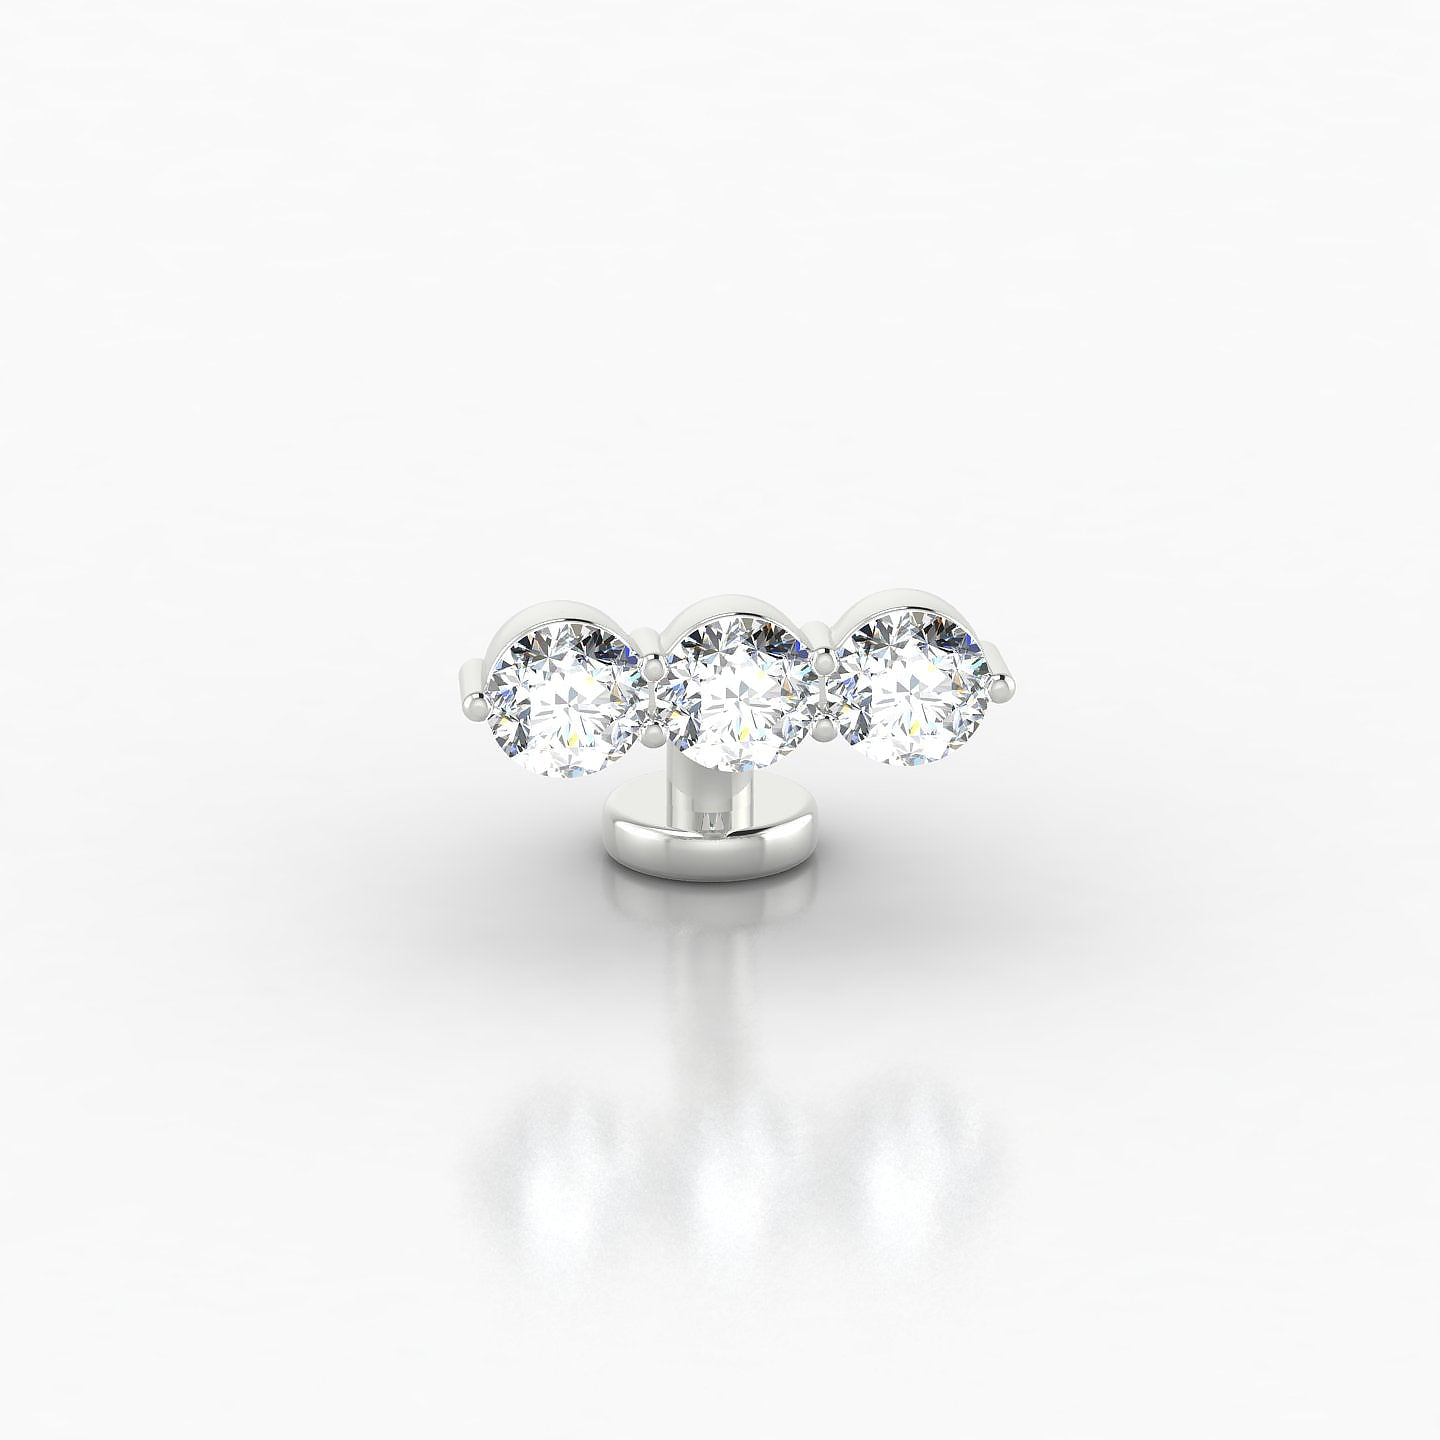 Ma'at | 18k White Gold 6 mm 10 mm Trilogy Diamond Floating Navel Piercing